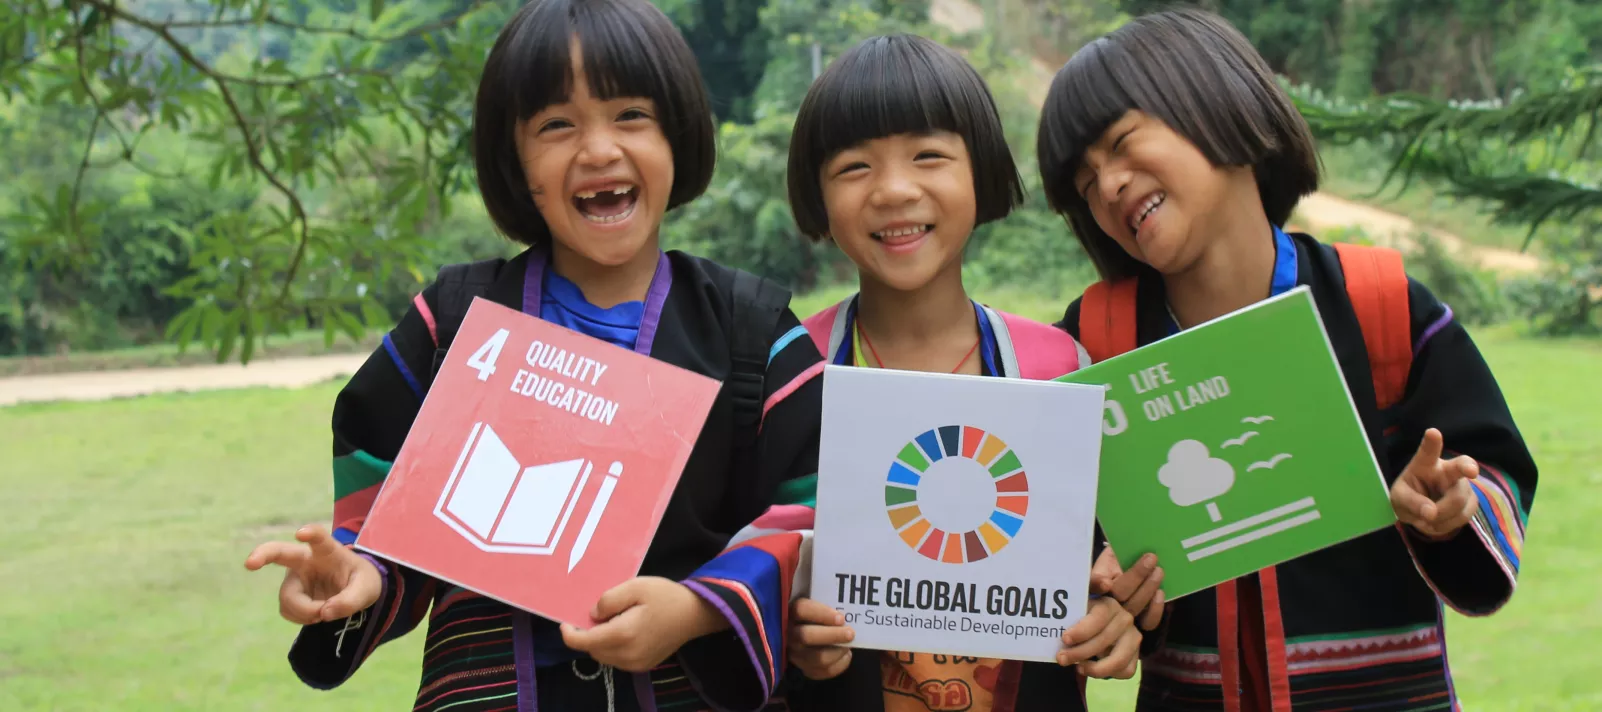 Thailand. Children hold signs about the SDGs.